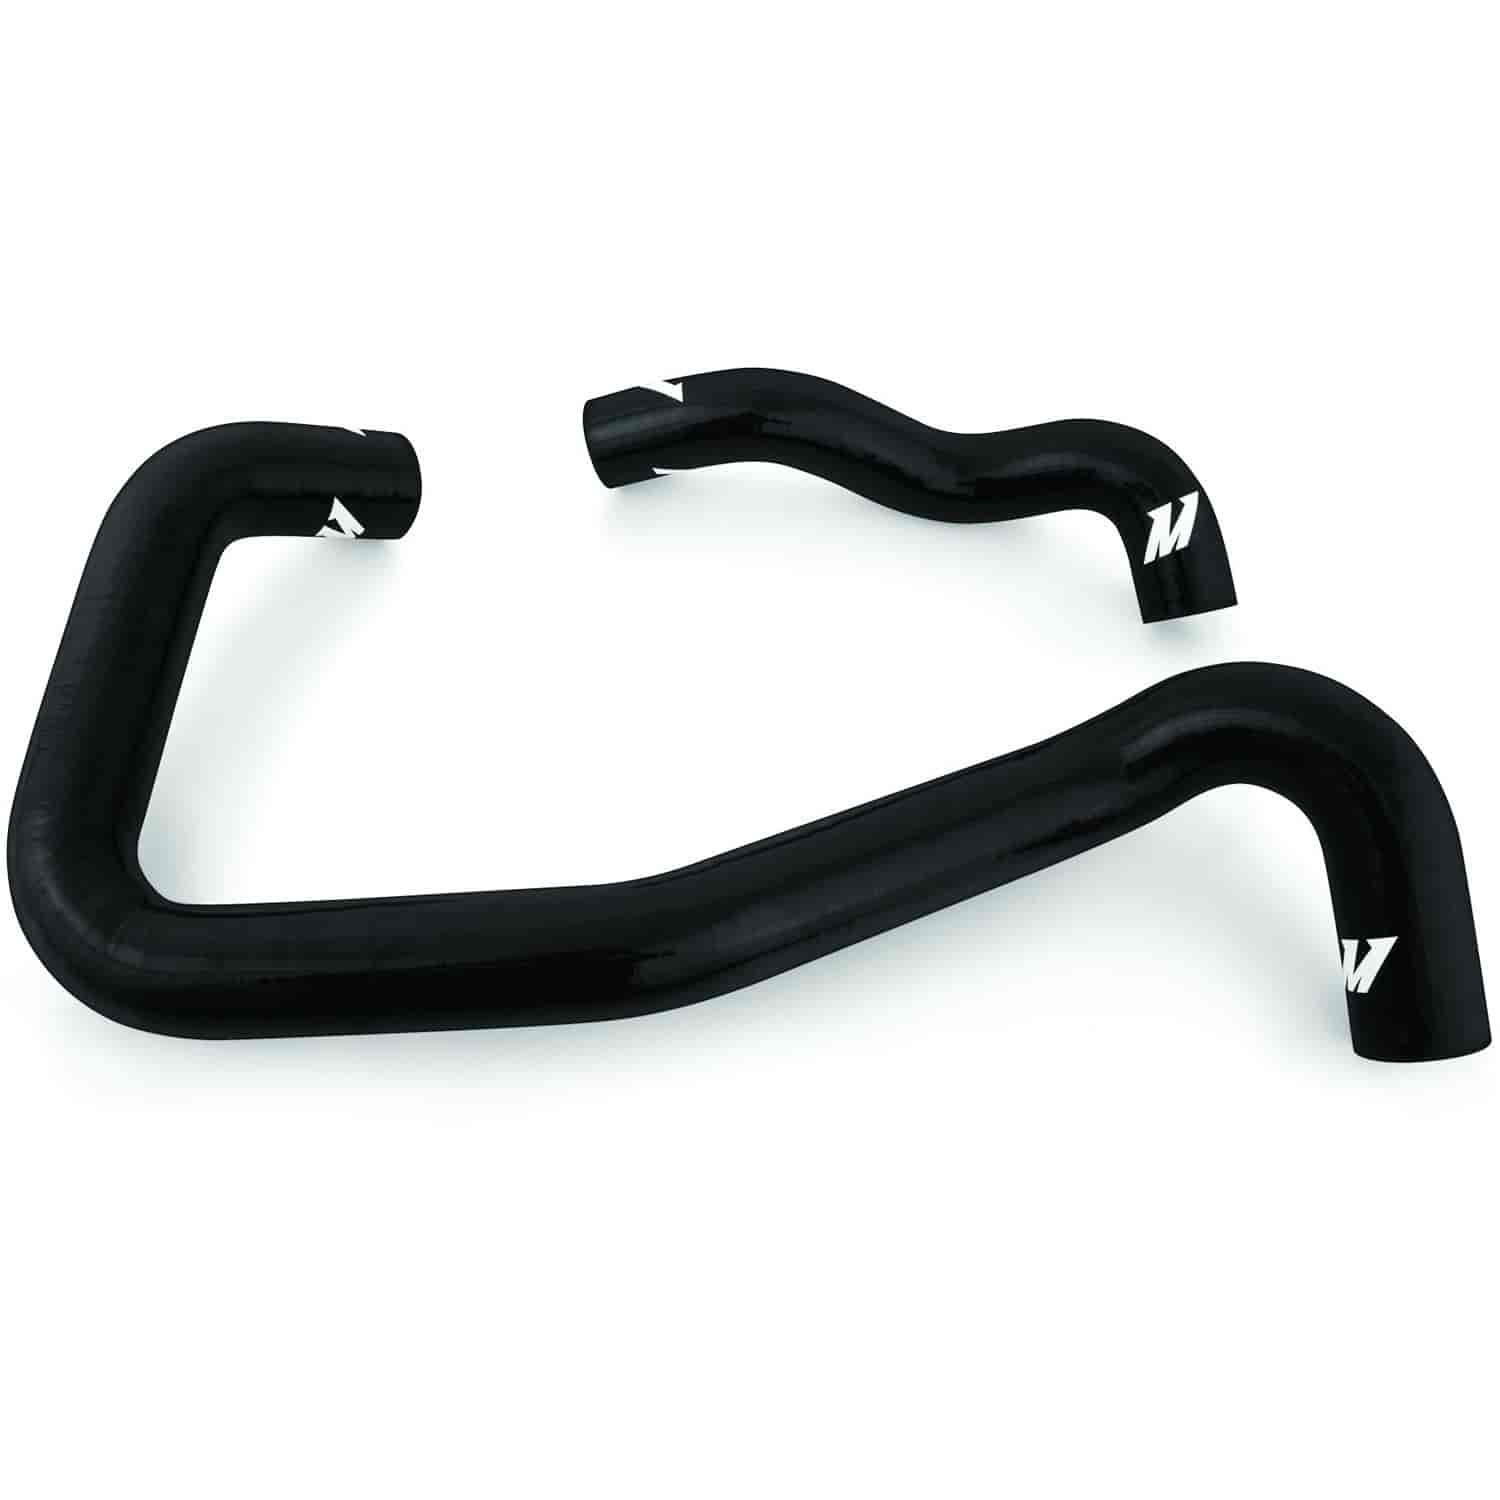 Silicone Radiator Hose Kit for 2005-2007 Ford 6.0L Powerstroke w/Mono Beam Chassis [Black]